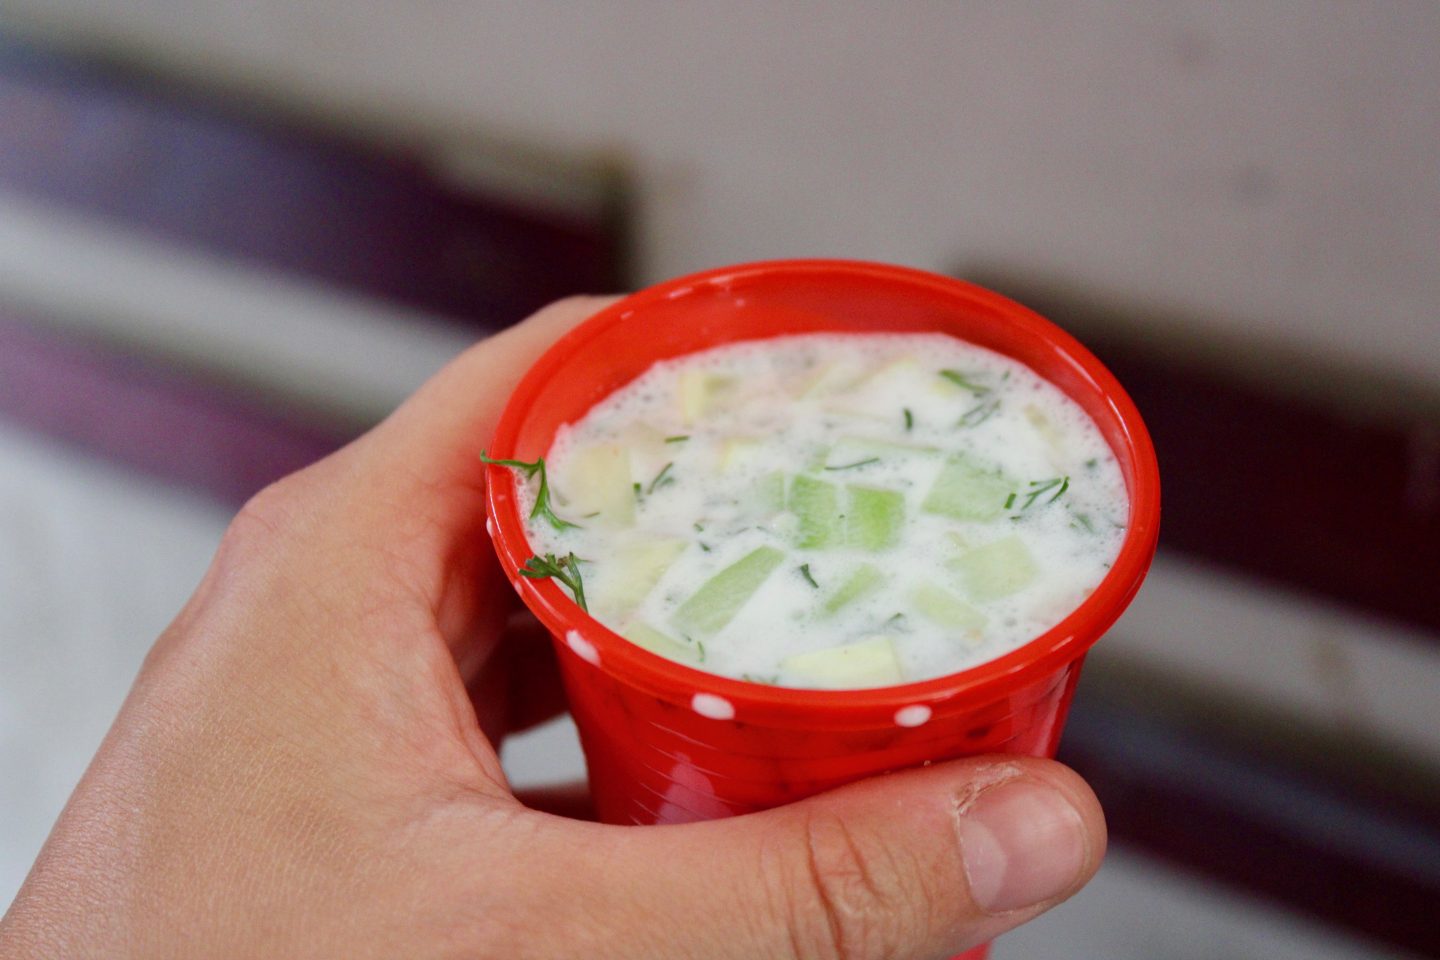 traditional bulgarian food in sofia: a portion of tarator in a red plastic cup, being held by a hand